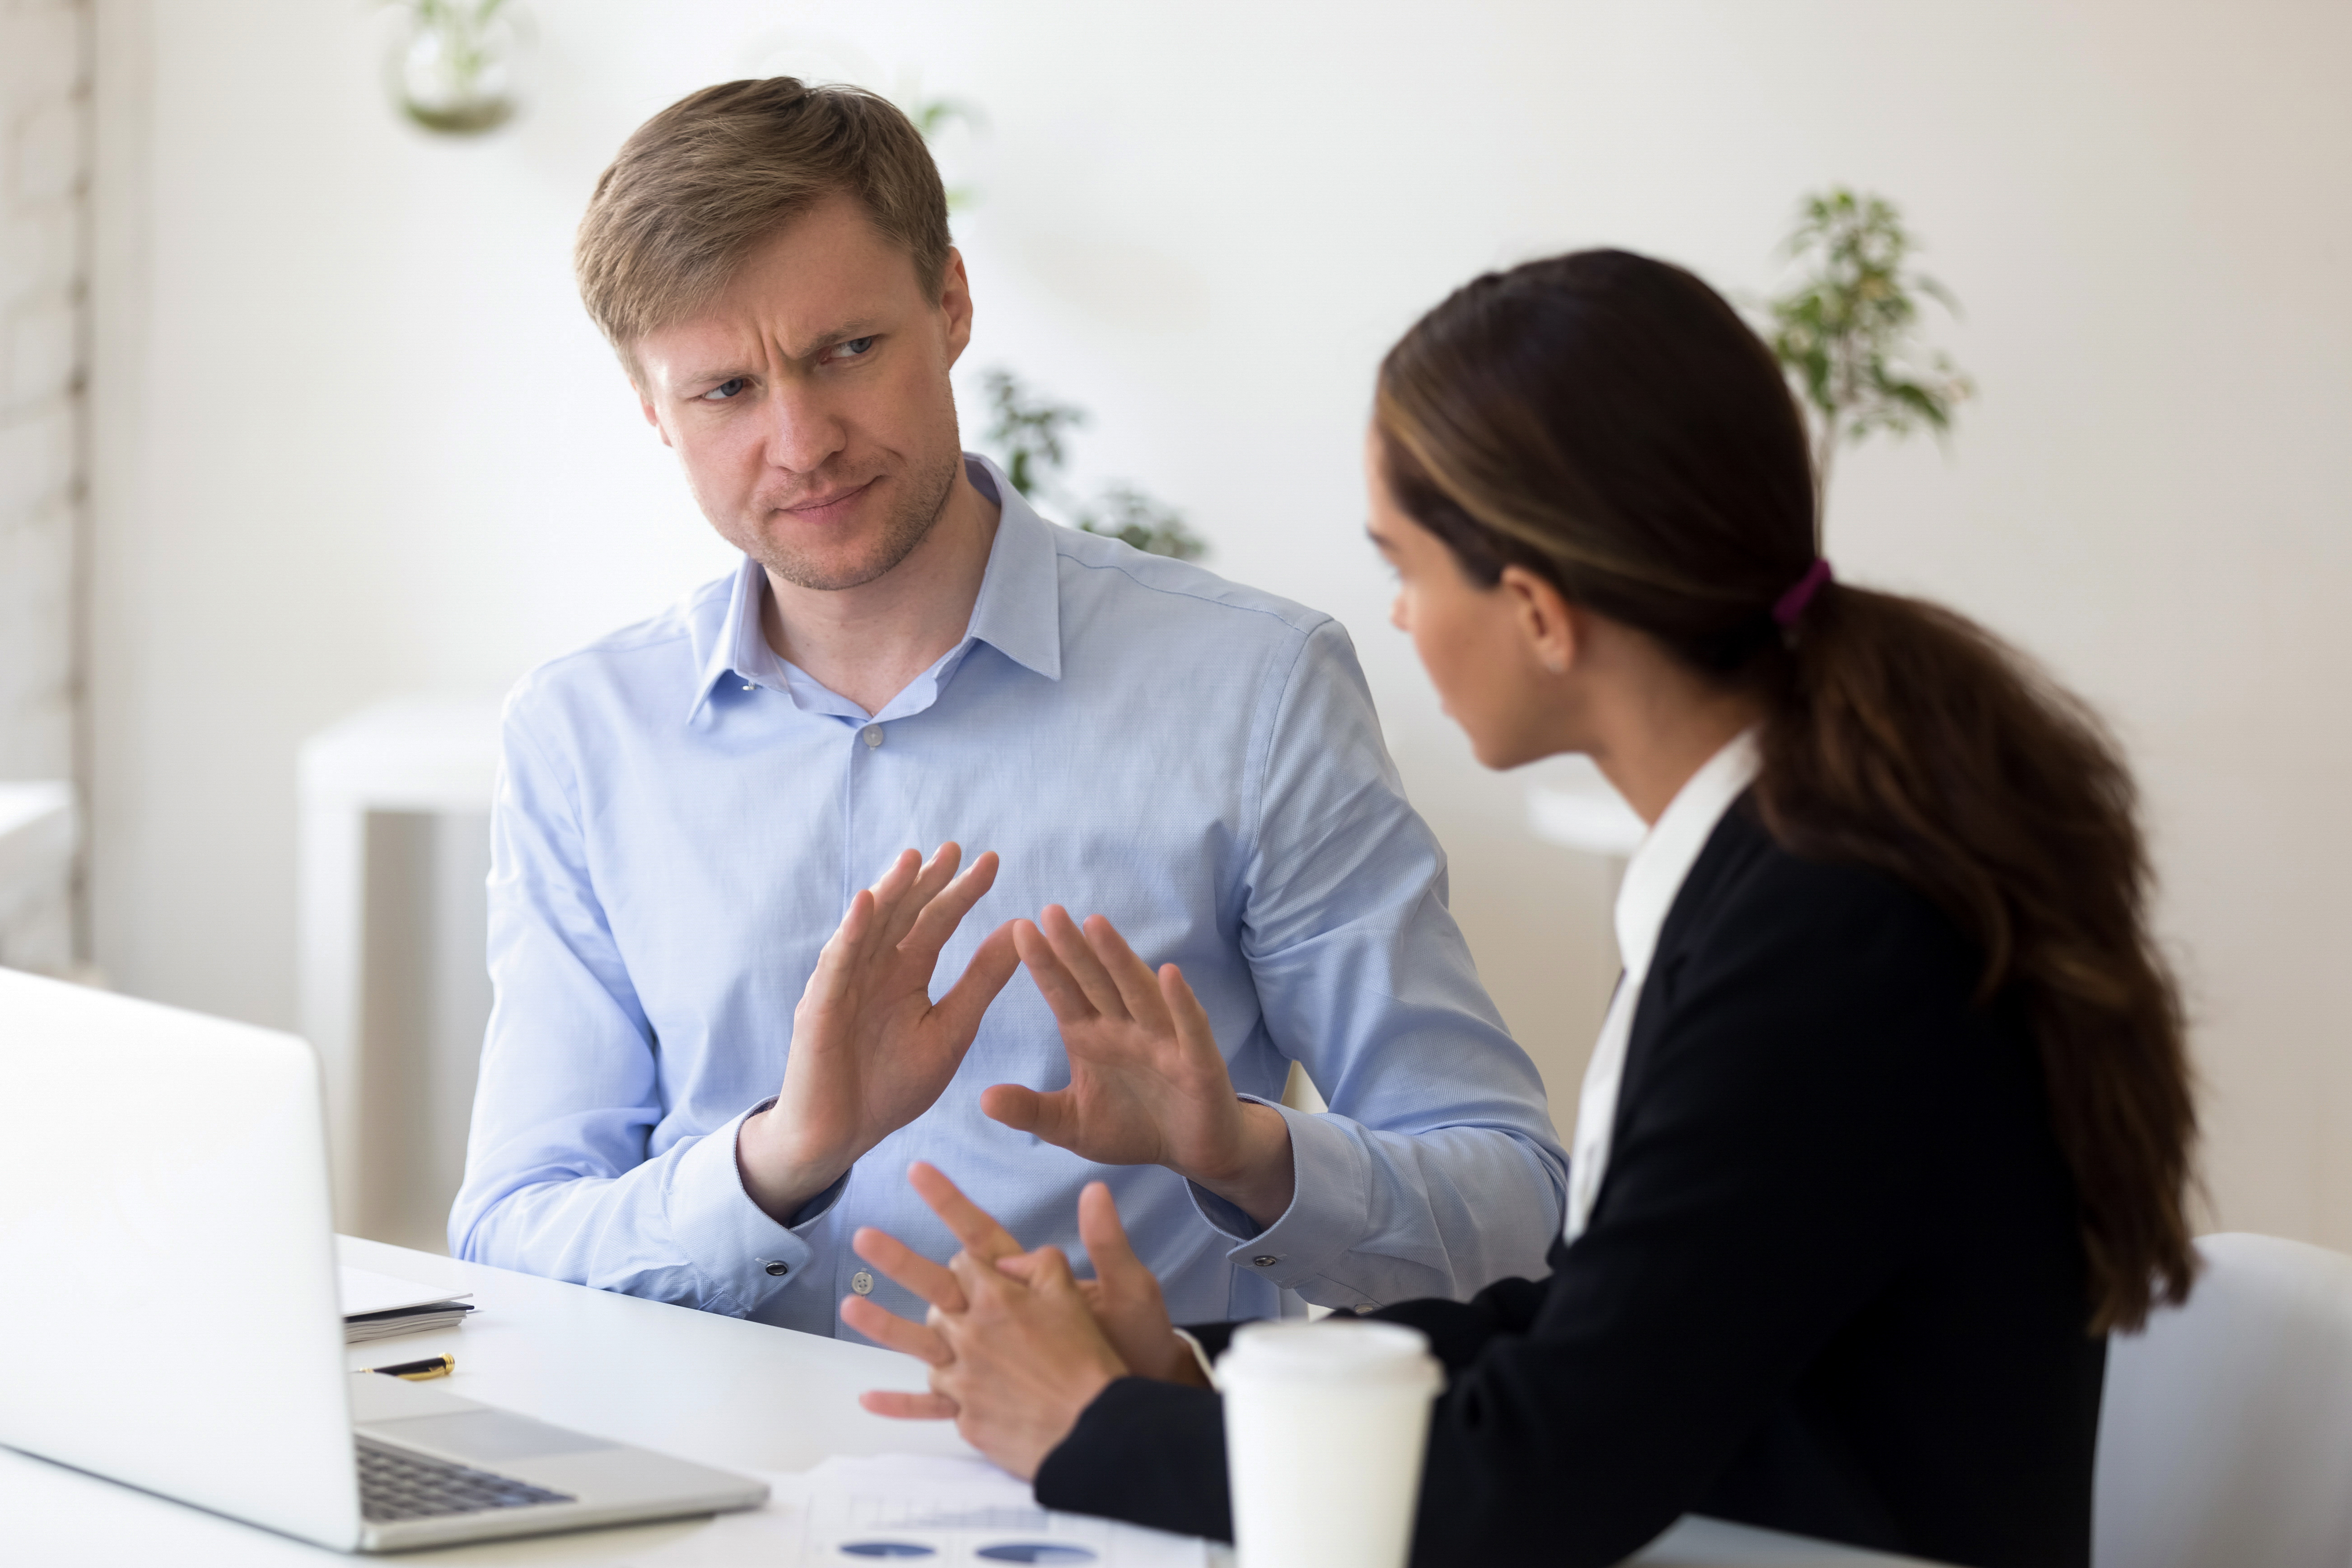 Man disagreeing with co-worker